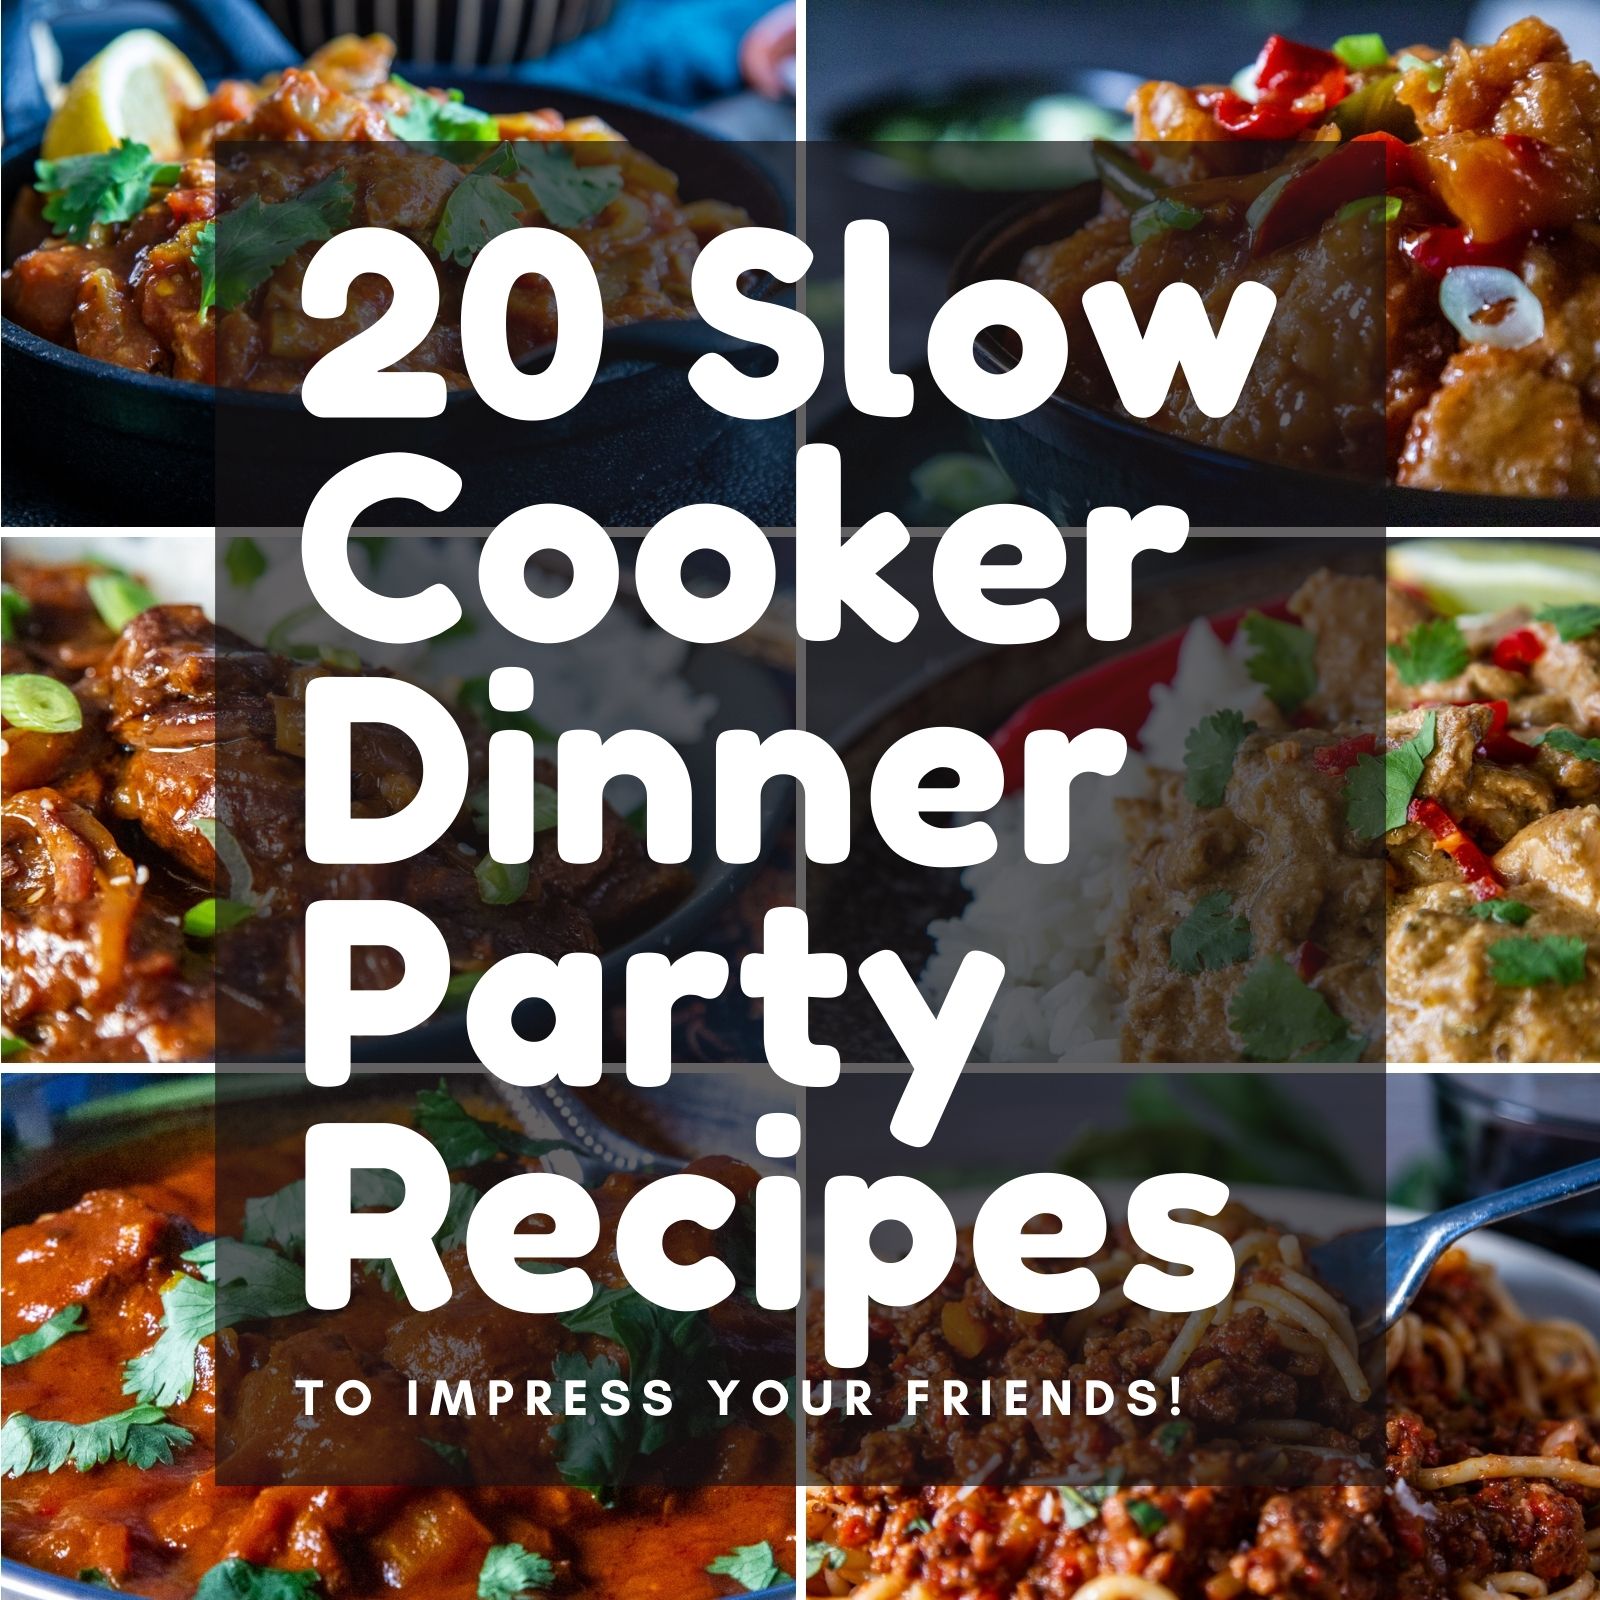 20 Slow Cooker Dinner Party Recipes (To Impress Your Friends!) - Slow Cooker  Club